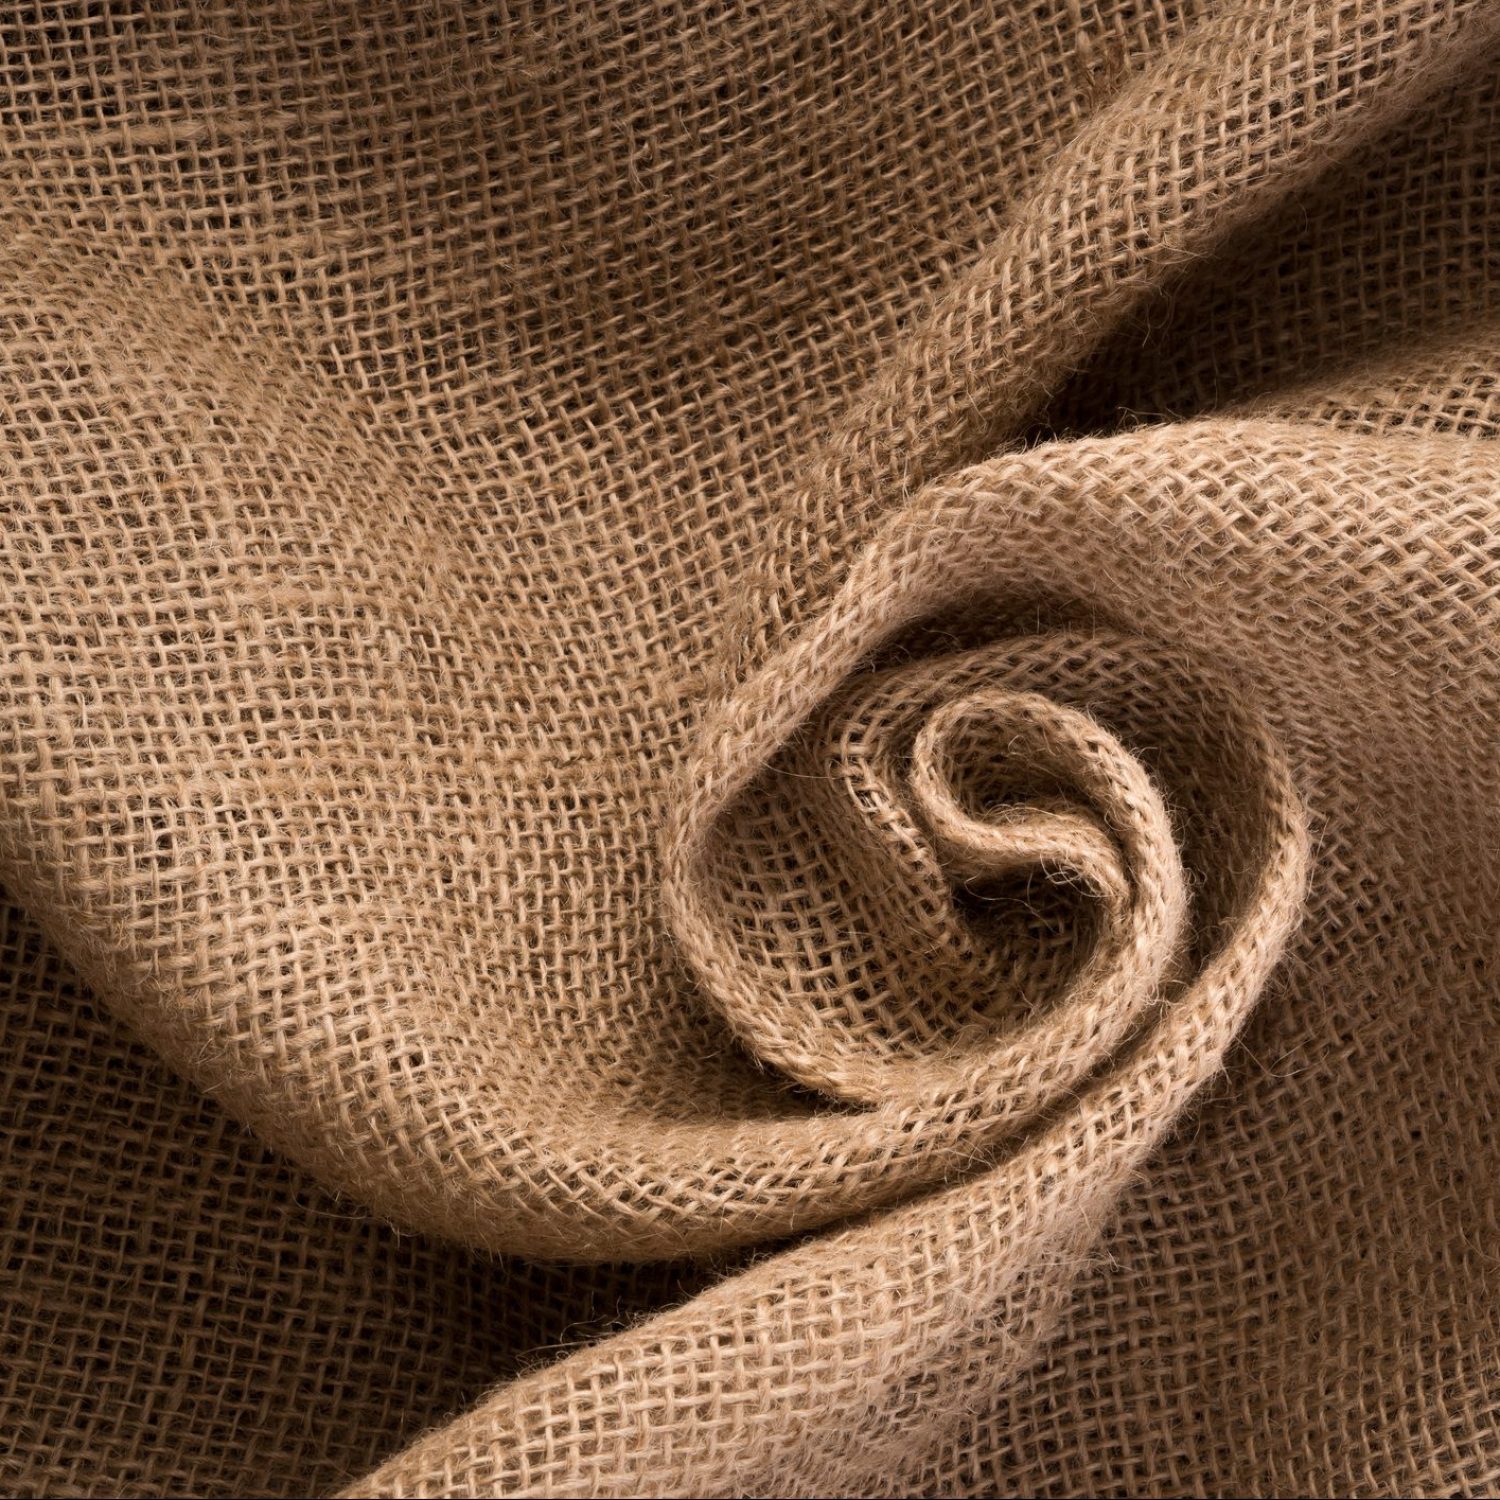 Burlap Texture Linen Material Vortex Swirling Directly Above View.